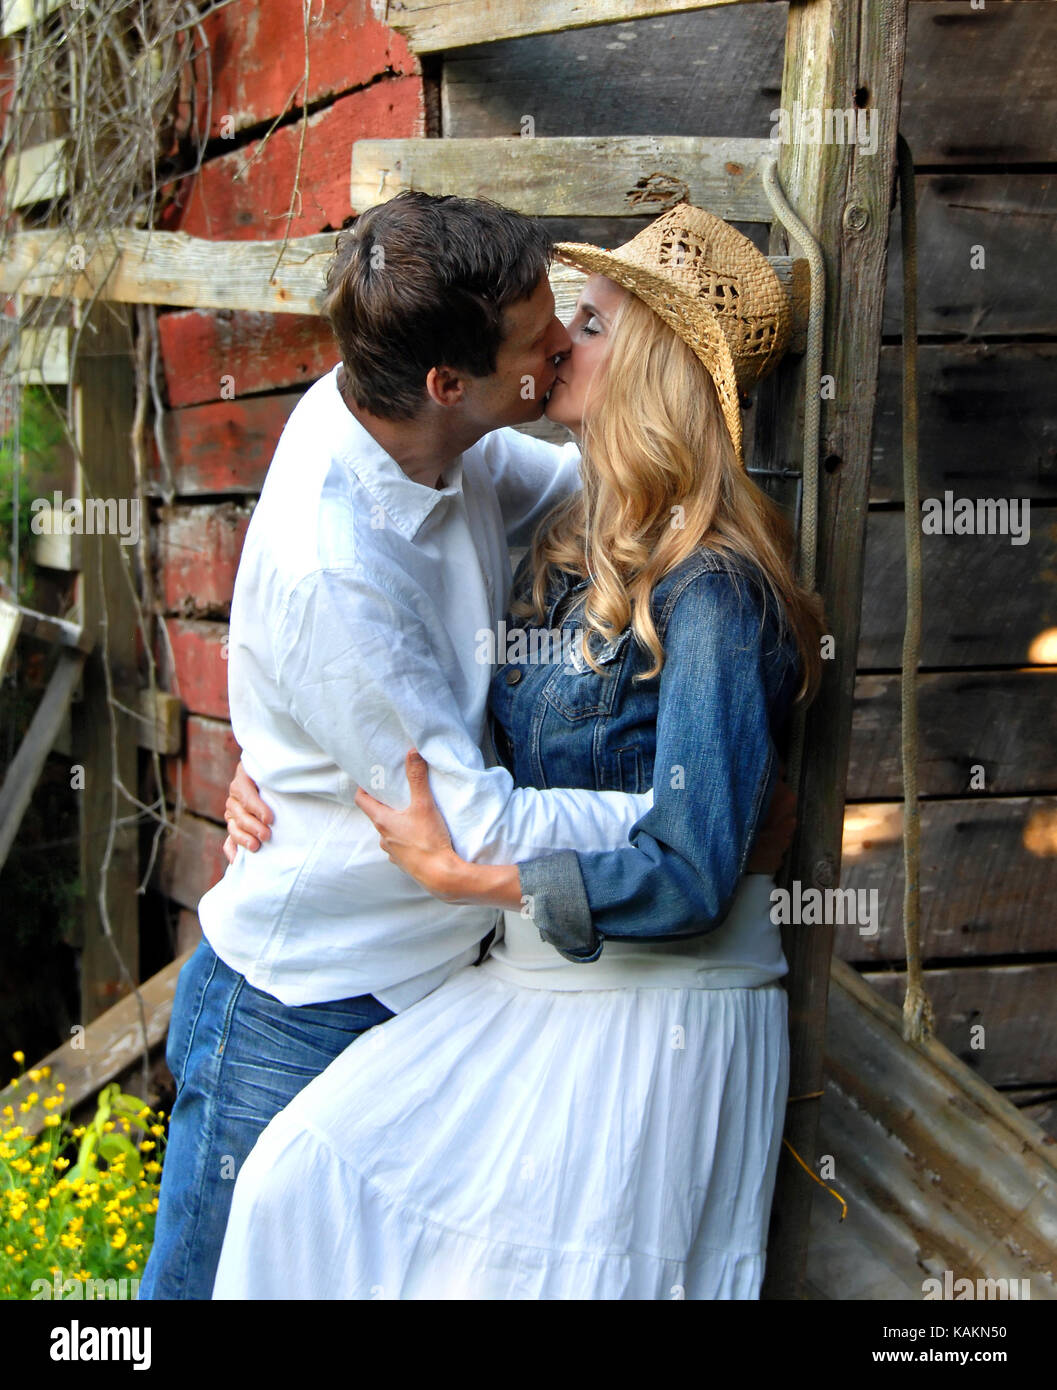 Couple share a romantic kiss leaning against a rustic, red wooden barn.  She is wearing a denim jacket and white dress.  He is wearing jeans and a whi Stock Photo